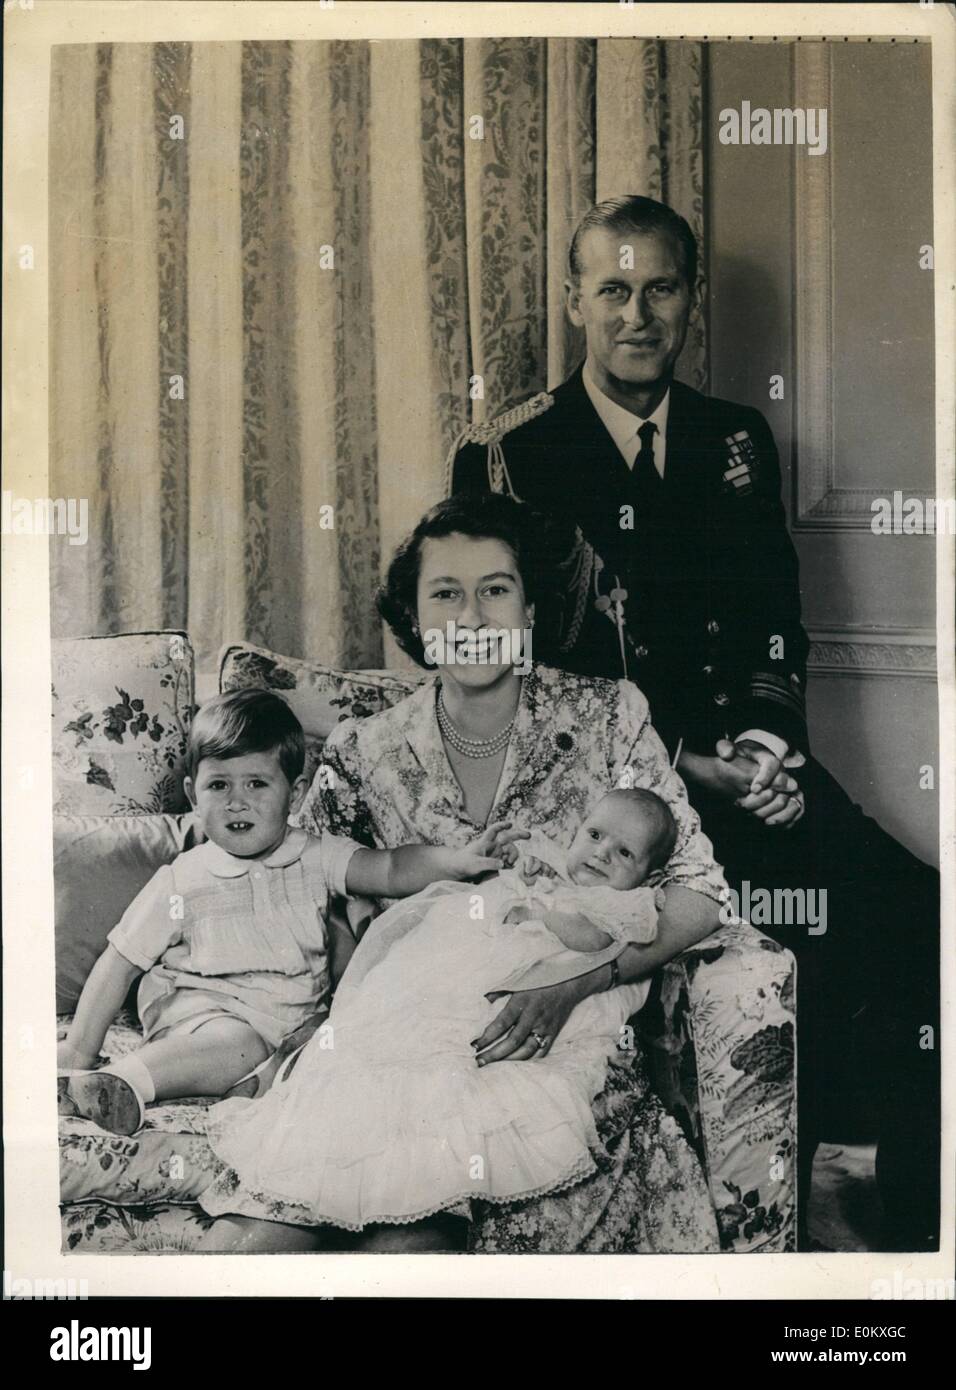 Jan. 01, 1951 - Princess Elizabeth and her Family Royal Command group clarence house. Most resent photograph taken by baron of Their Royal Highness's princess Elizabeth , the Duke of Edinburgh and their children princes Charles and princess Anne. The duke of wearing the uniform of a Lieut commander of the Royal Navy. This picture - a Royal command study was taken in the ''(Illegible)'' sitting room of Clarence house. Stock Photo